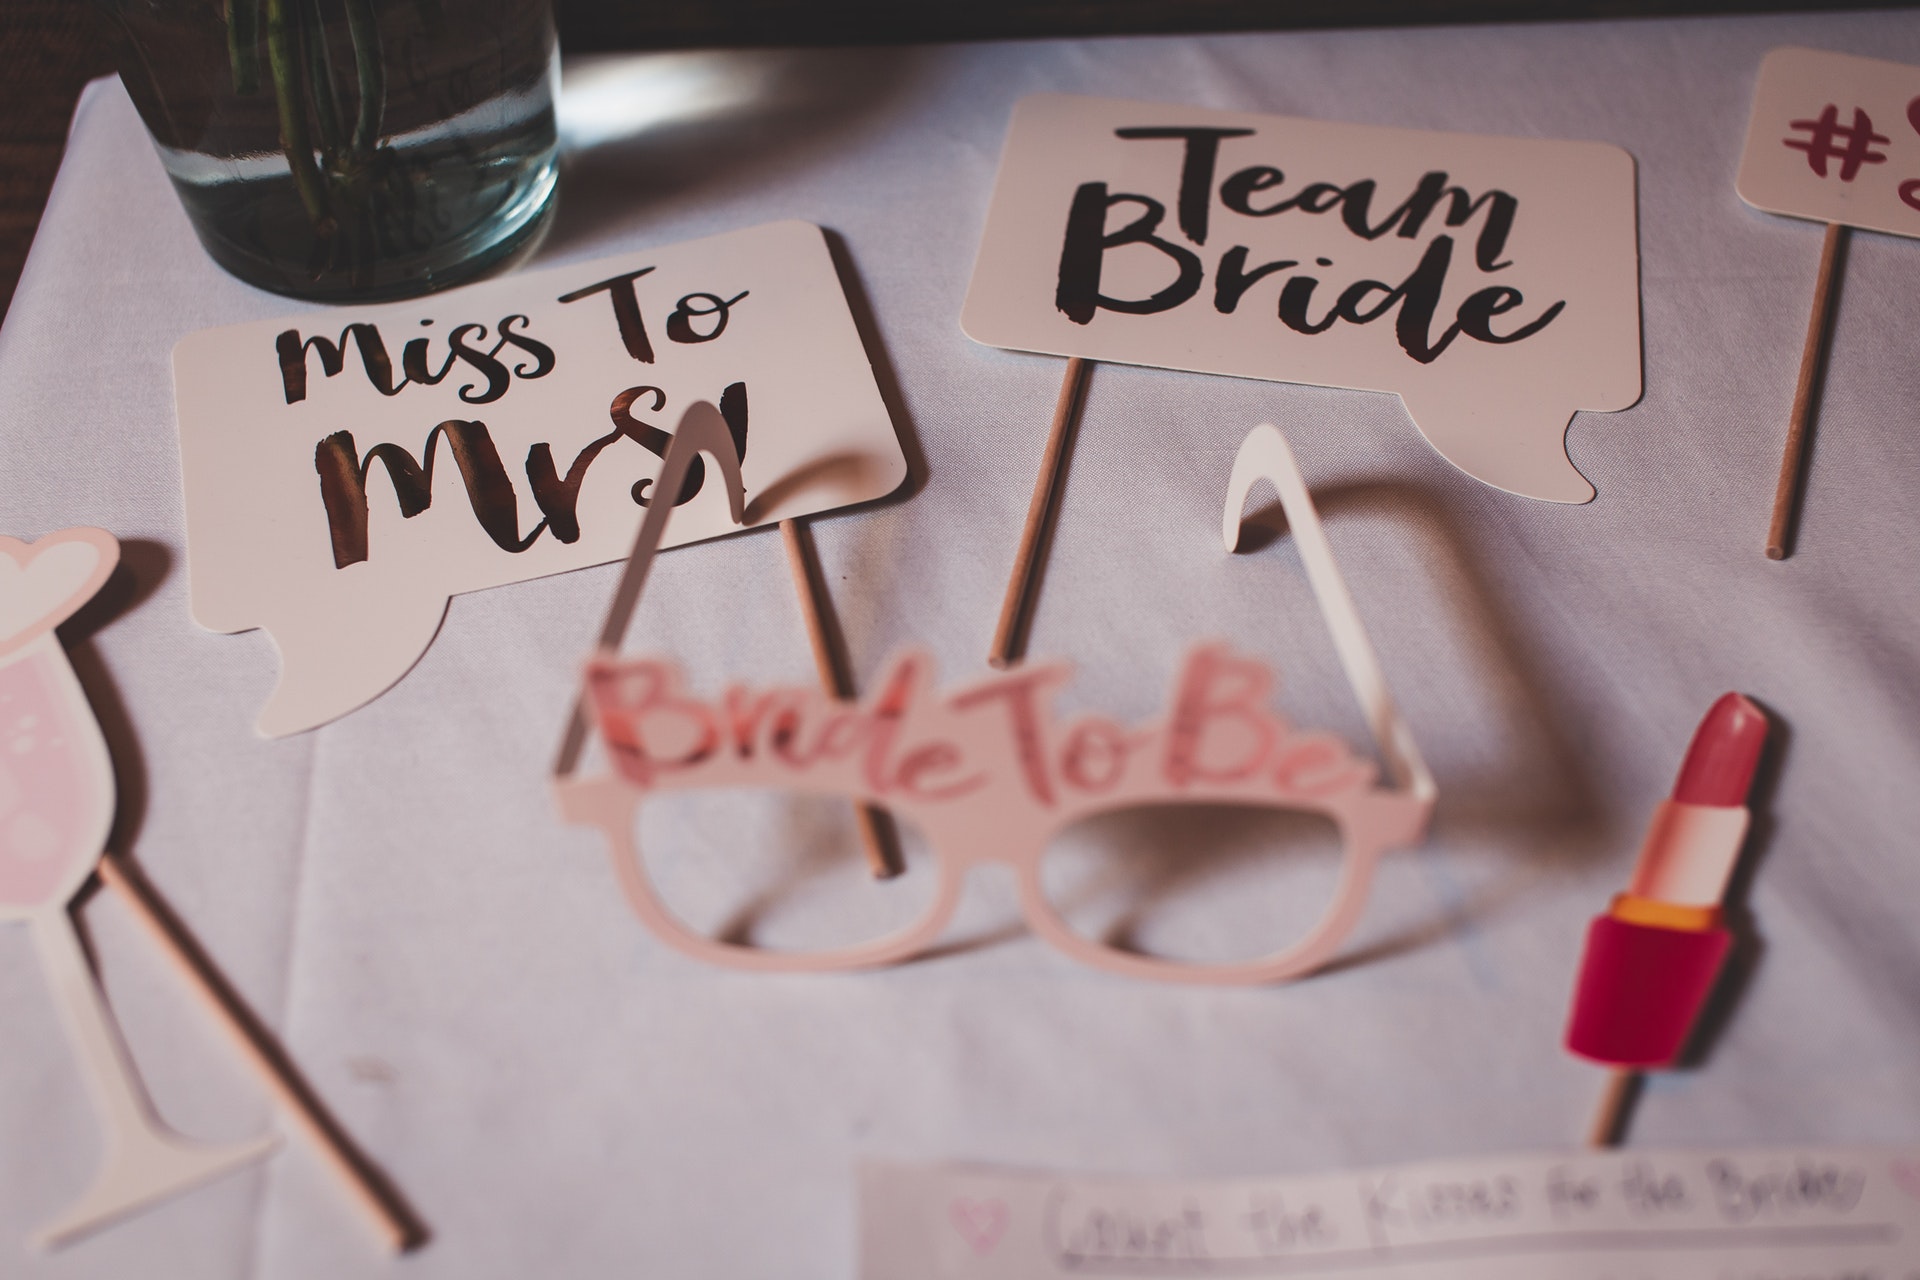 Should You Do Both a Bridal Shower and a Bachelorette Party?